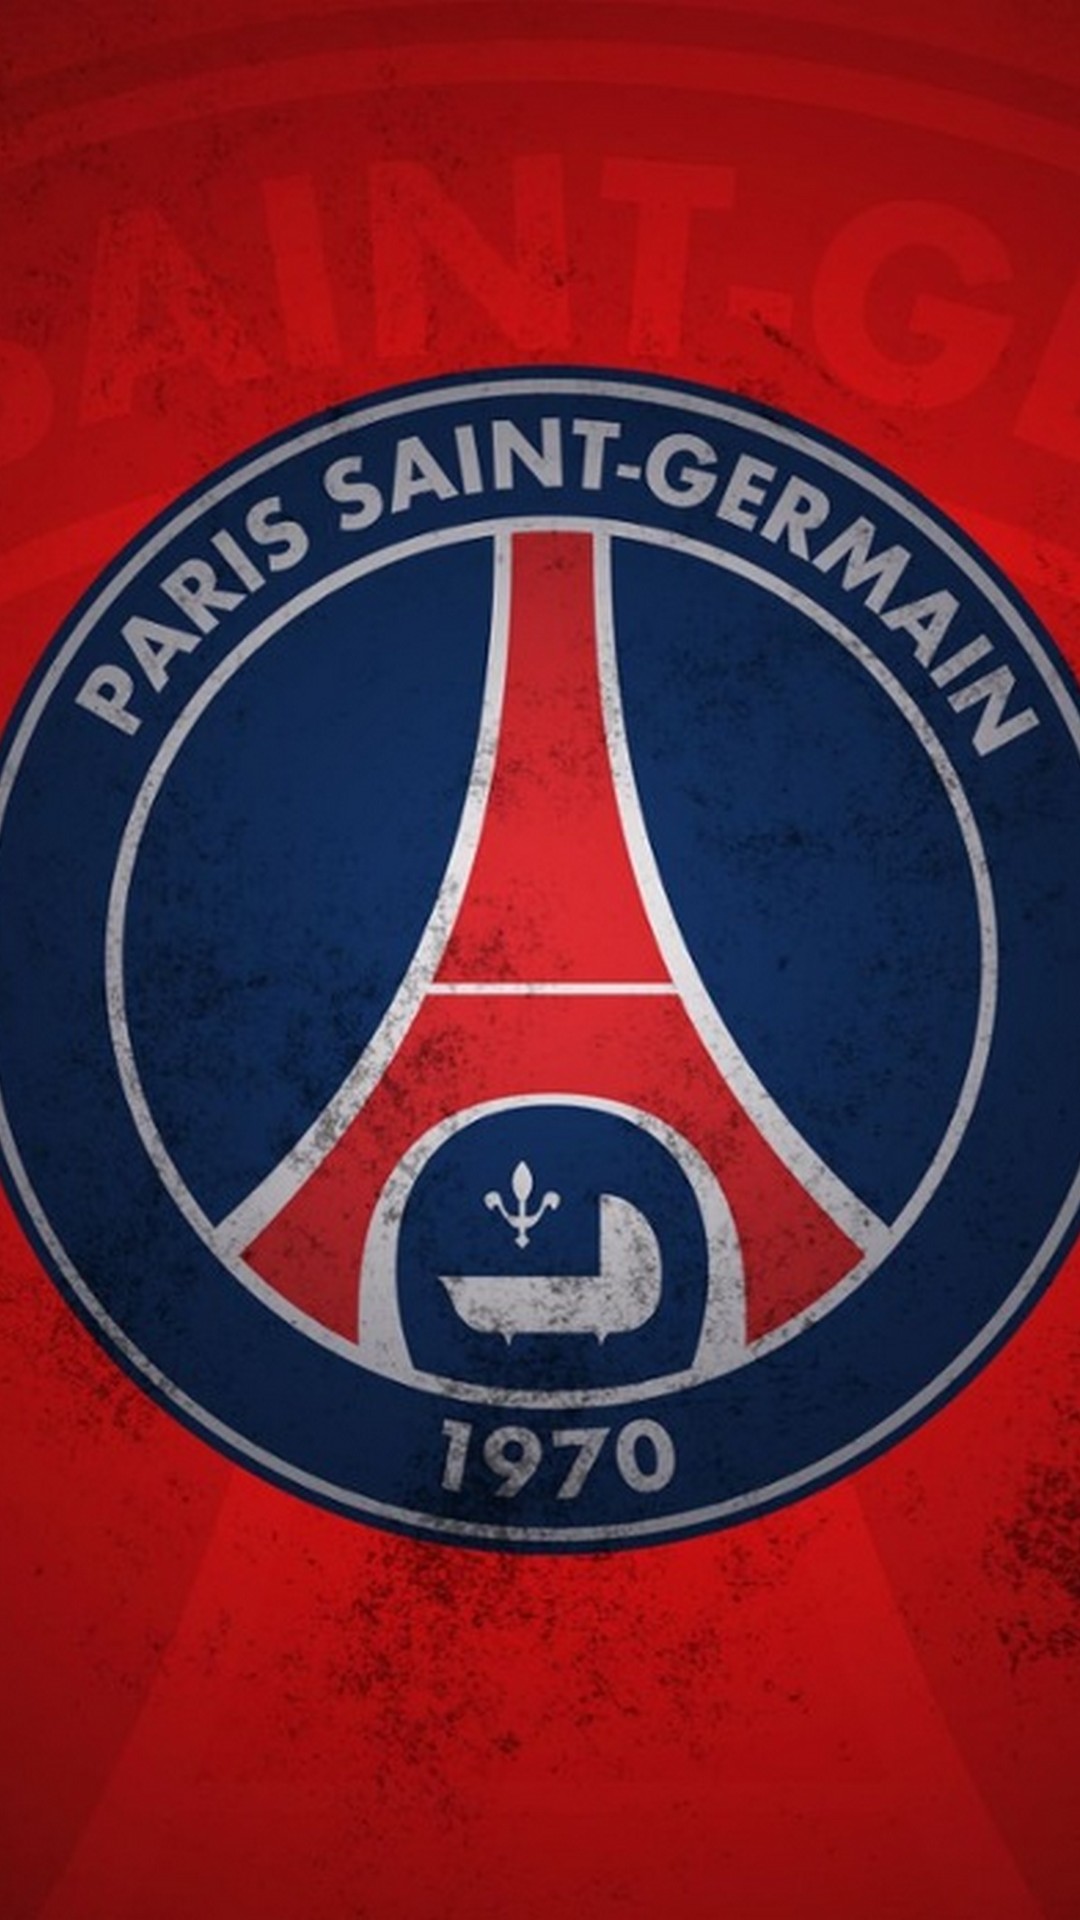 PSG Wallpaper iPhone HD with resolution 1080x1920 pixel. You can make this wallpaper for your Mac or Windows Desktop Background, iPhone, Android or Tablet and another Smartphone device